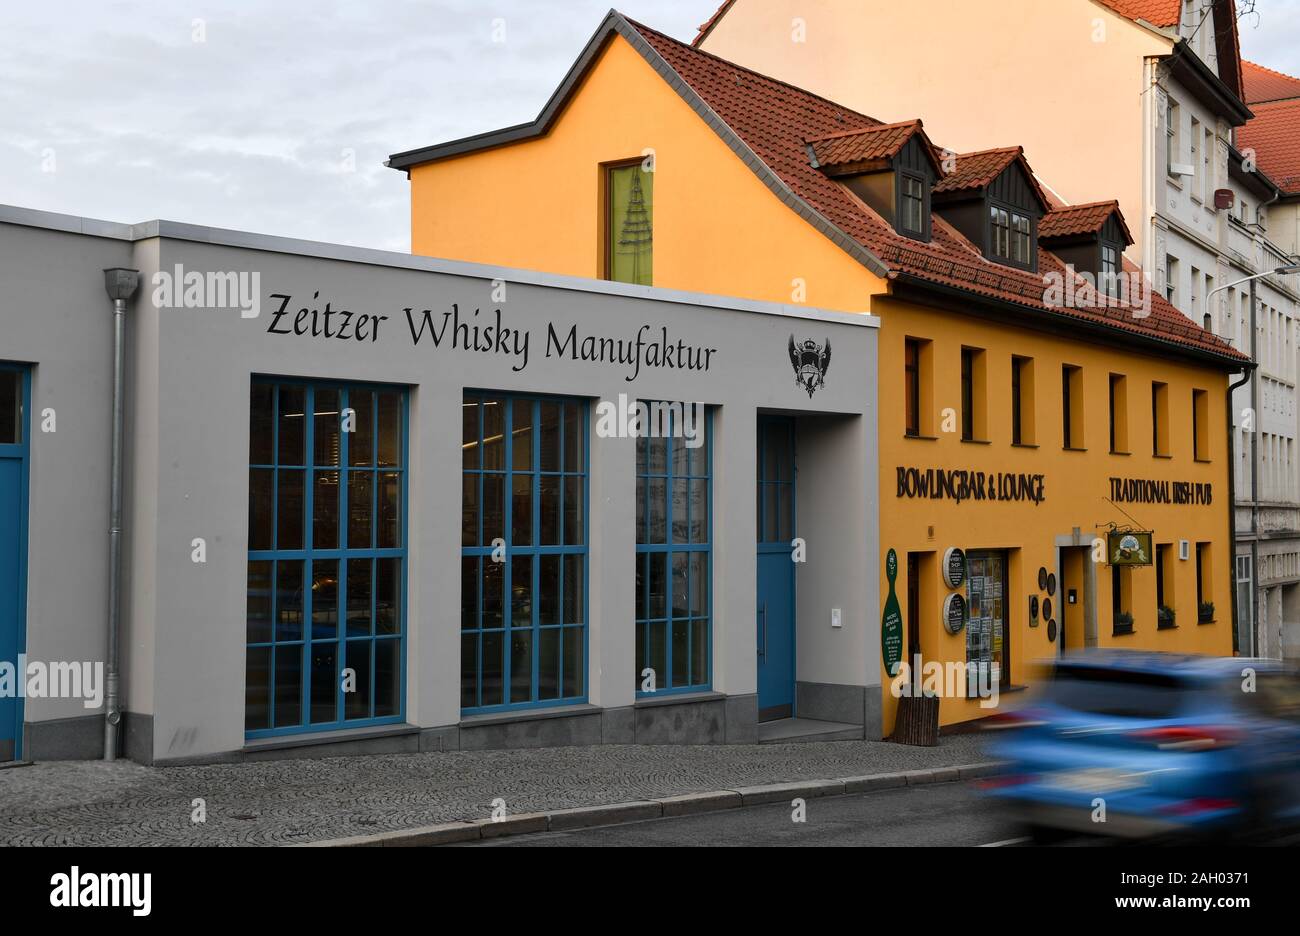 16 December 2019, Saxony-Anhalt, Zeitz: View of the Zeitzer whisky manufactory in Zeitz. The manufactory in Zeitz distils around 22000 litres of pure alcohol per year. New barrels are regularly added to the warehouse, and a maximum of one barrel per month is bottled. At the moment three and five year old whisky is available. The demand has increased significantly before Christmas, says the trained chemist. According to the Association of German Whisky Distillers, the market share of German whisky is 0.4 percent. There are currently 210 whisky distilleries in Germany. (to 'Oldest German whisky Stock Photo